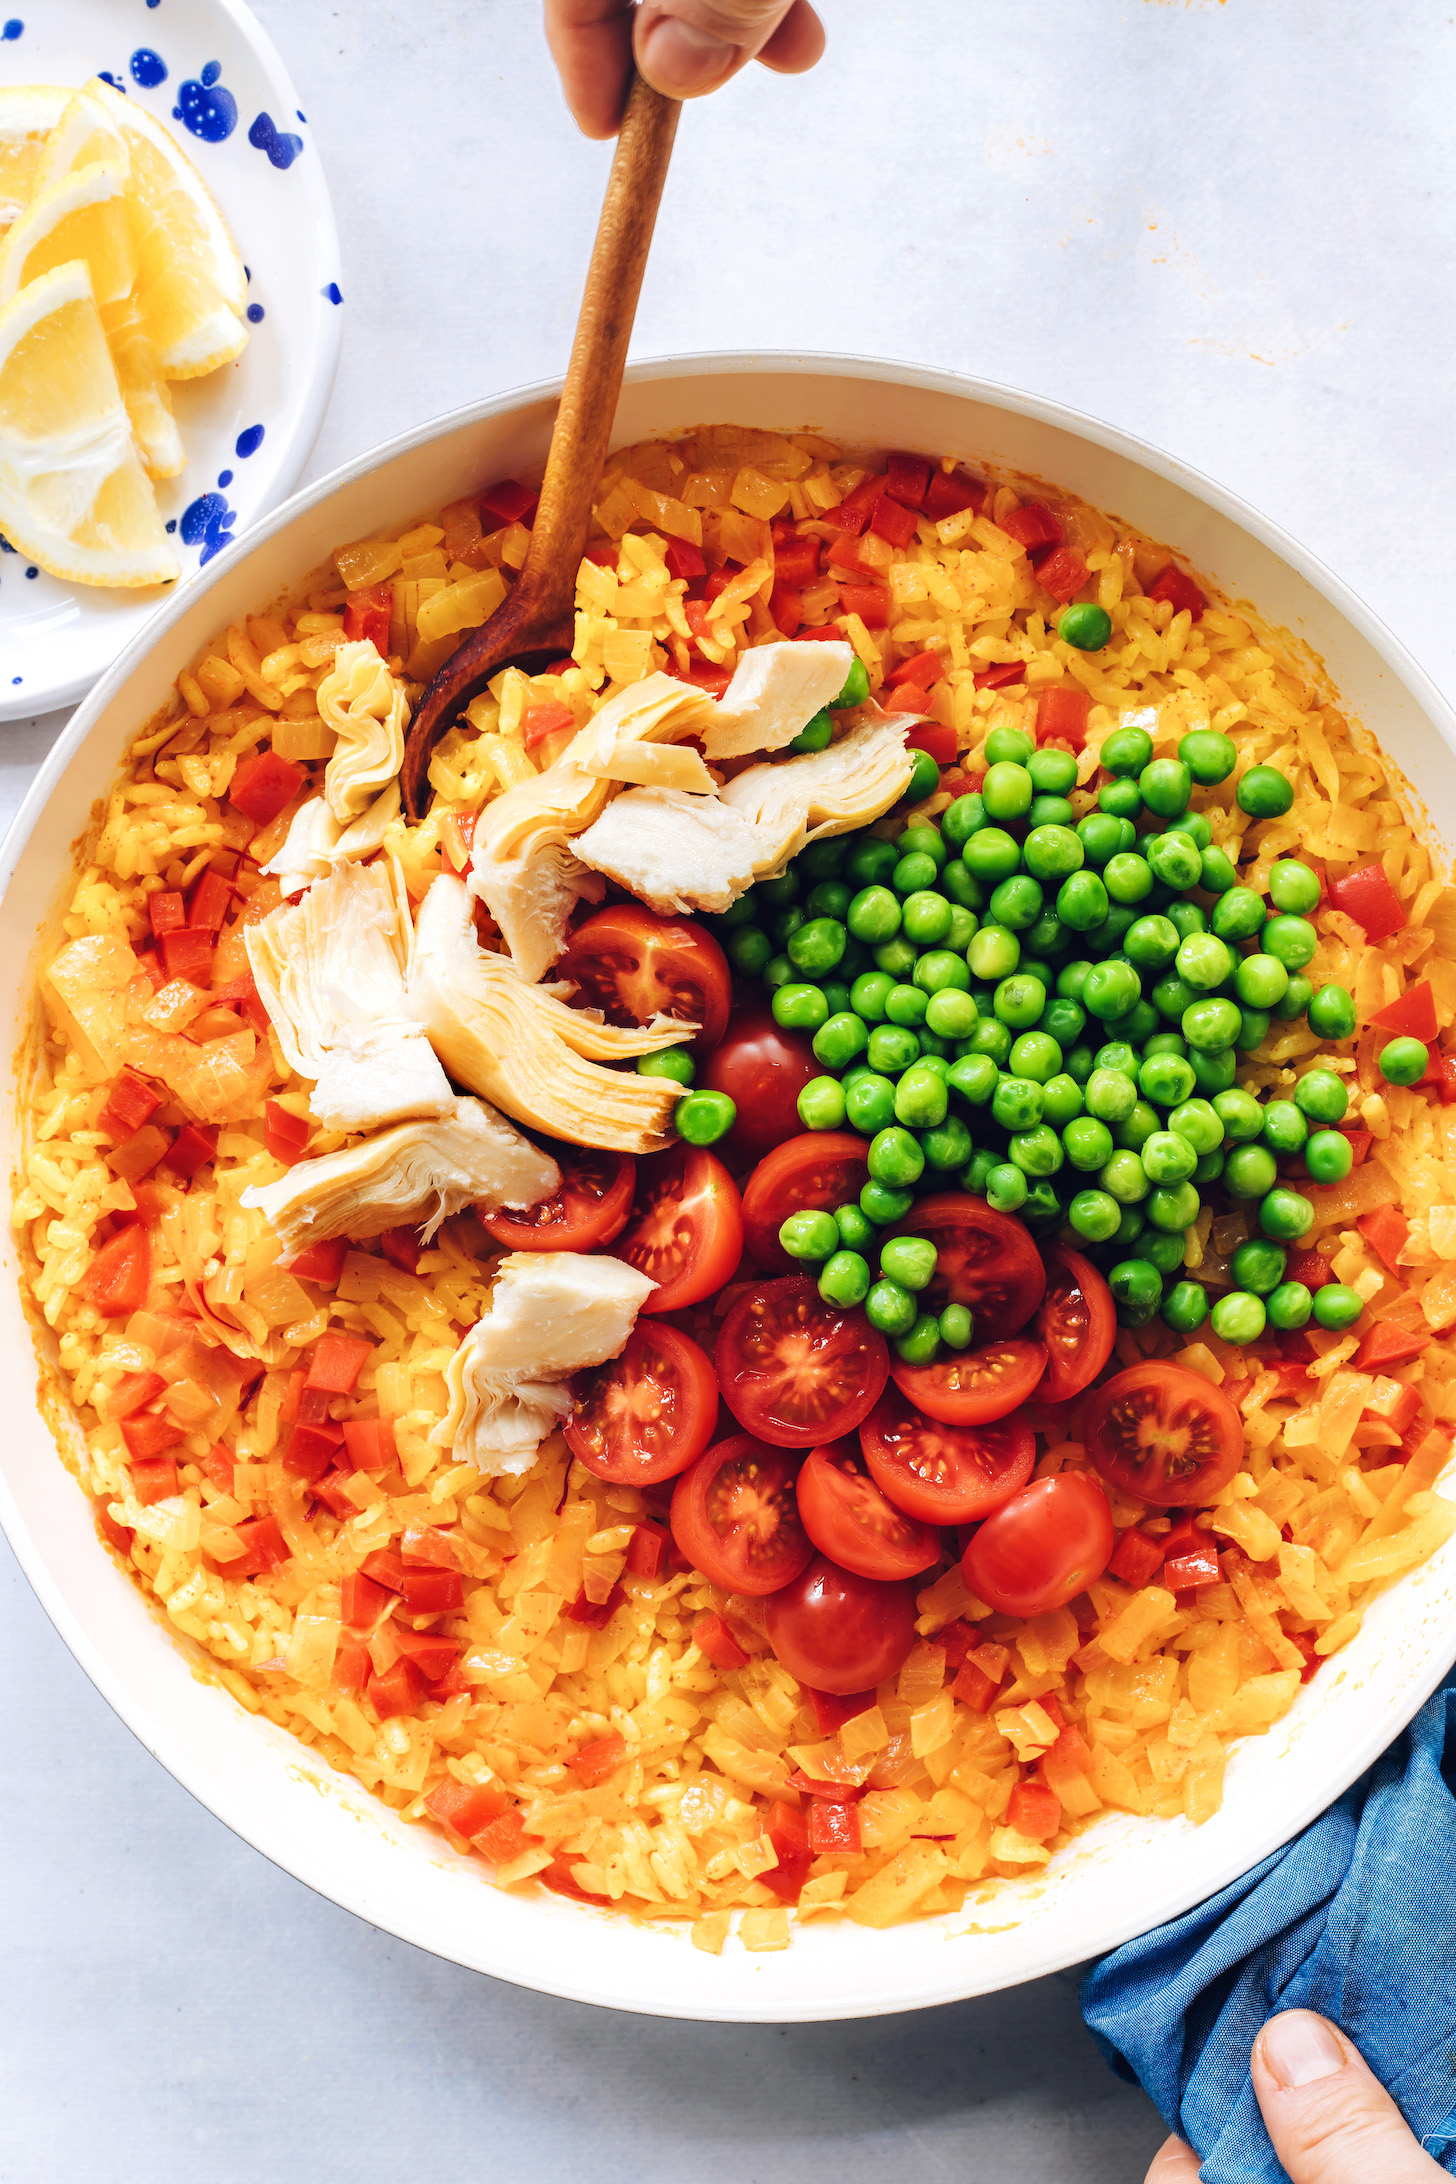 Stirring cherry tomatoes, artichoke hearts, and green peas into a skillet of vegan paella